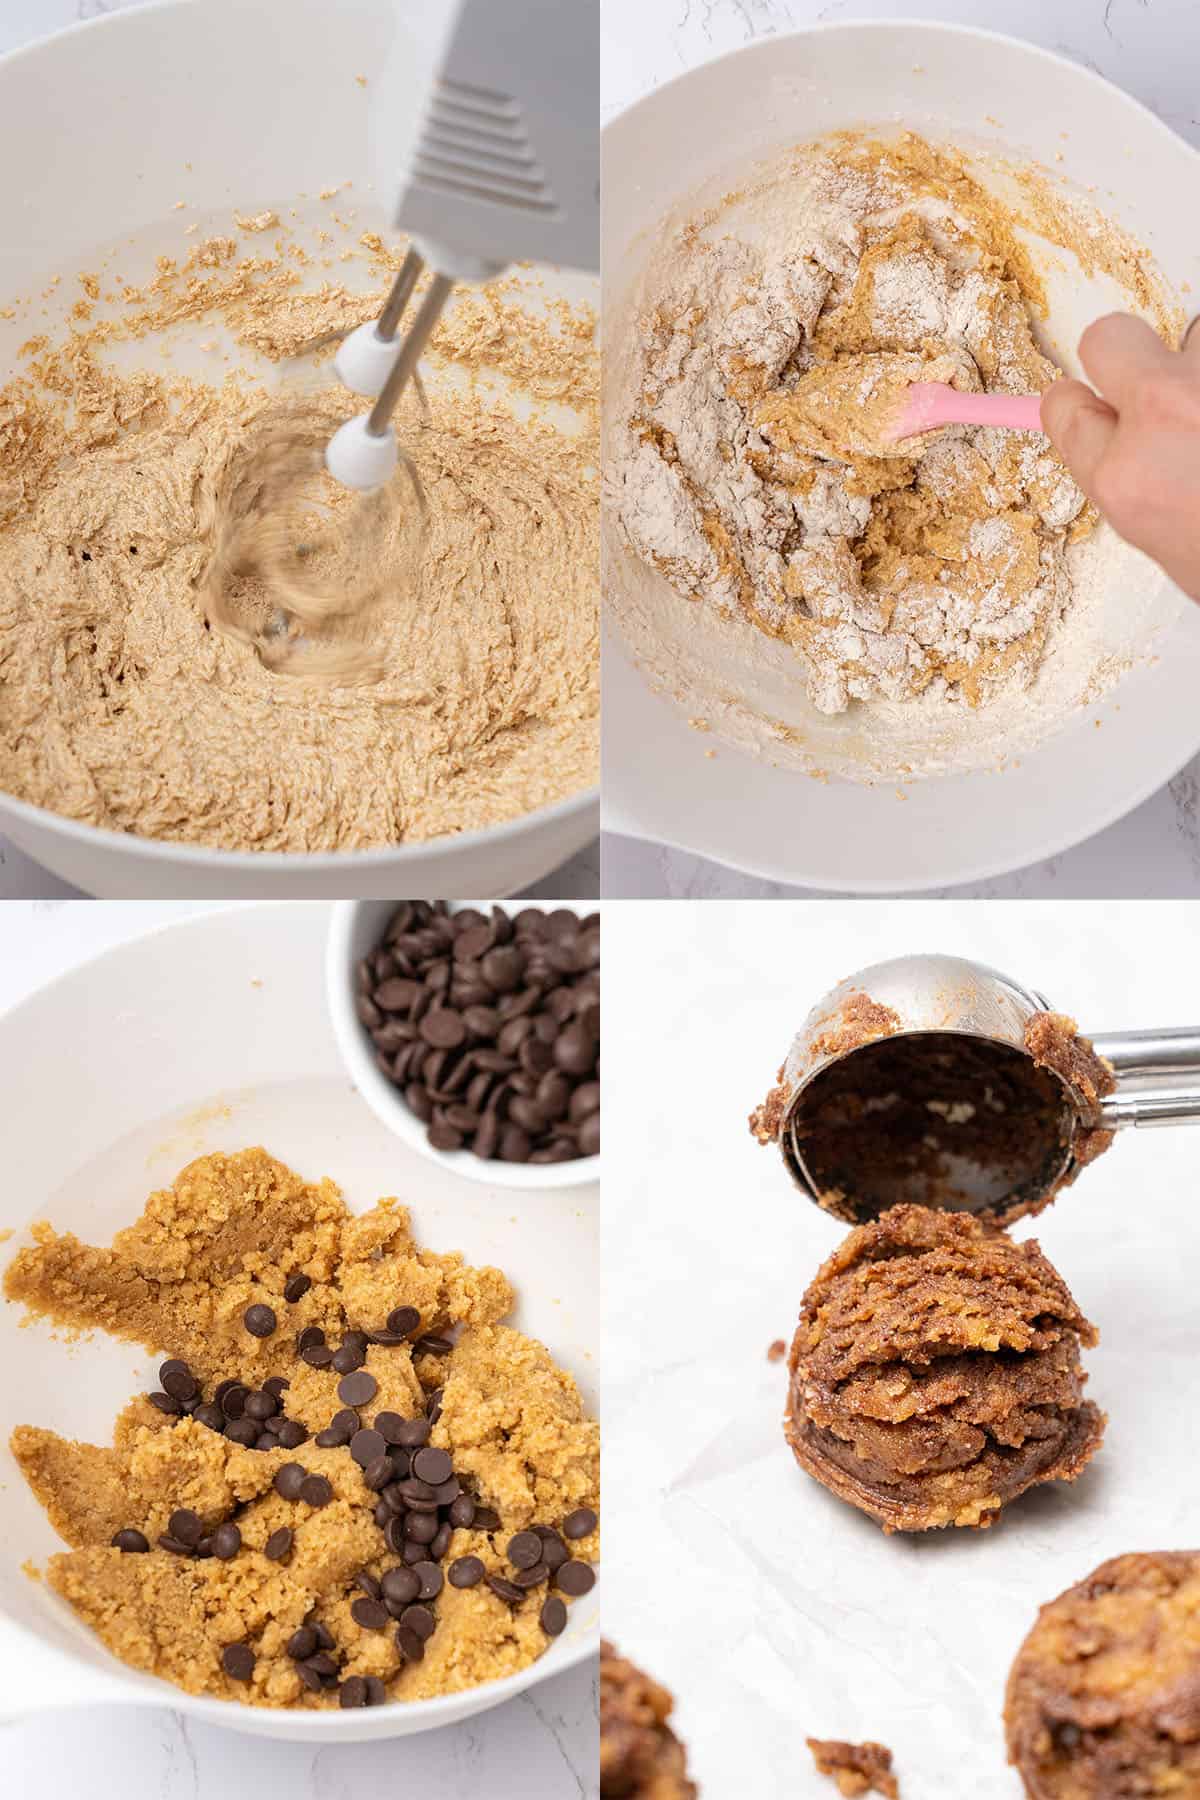 Step-by-step process of making edible cookie dough.